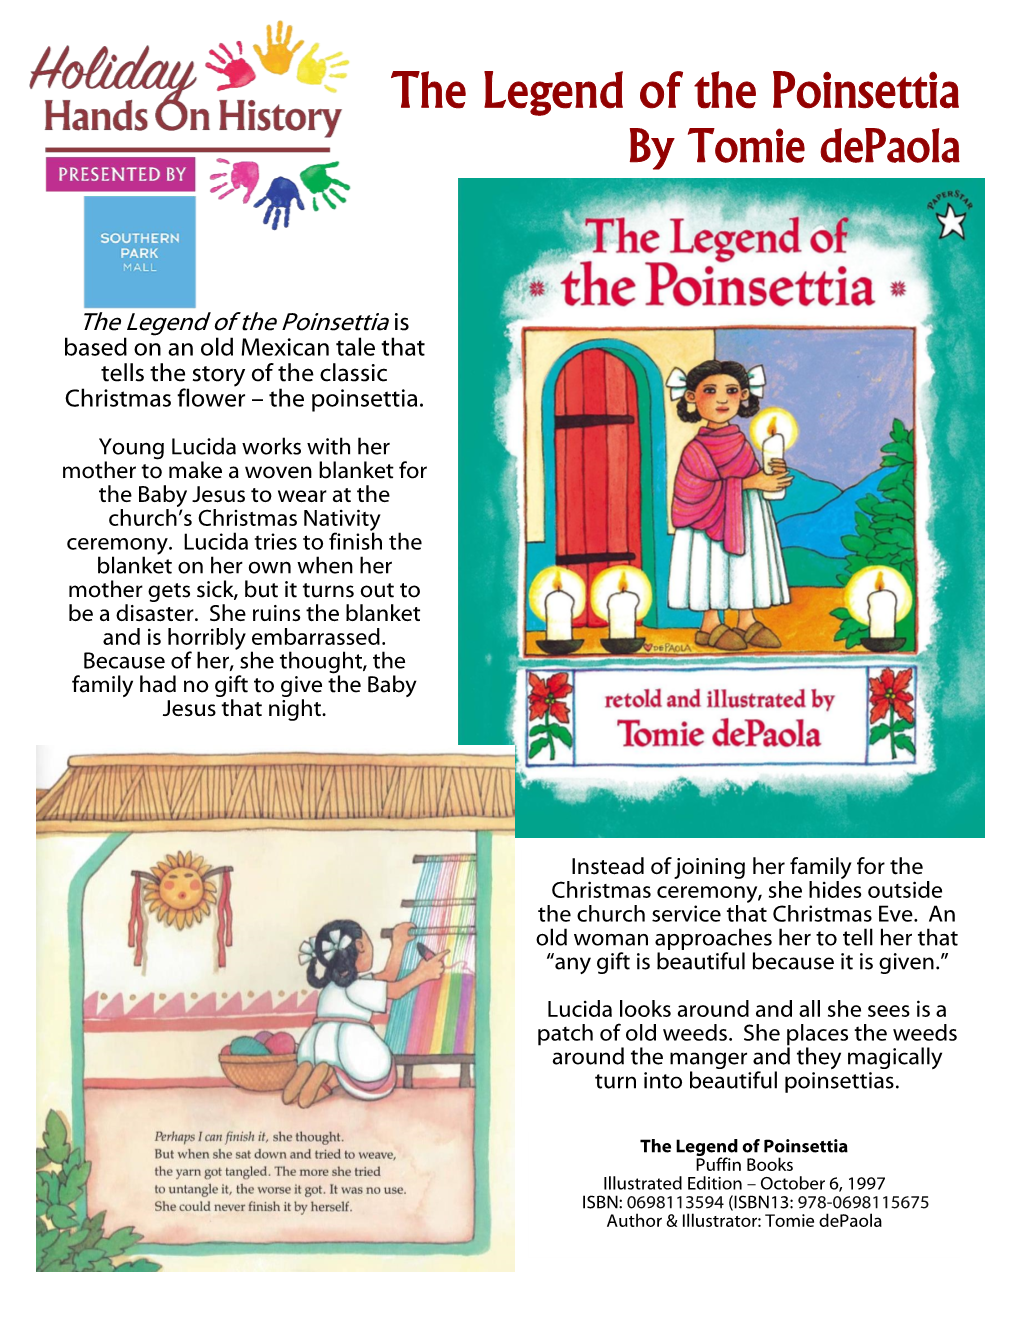 The Legend of the Poinsettia by Tomie Depaola